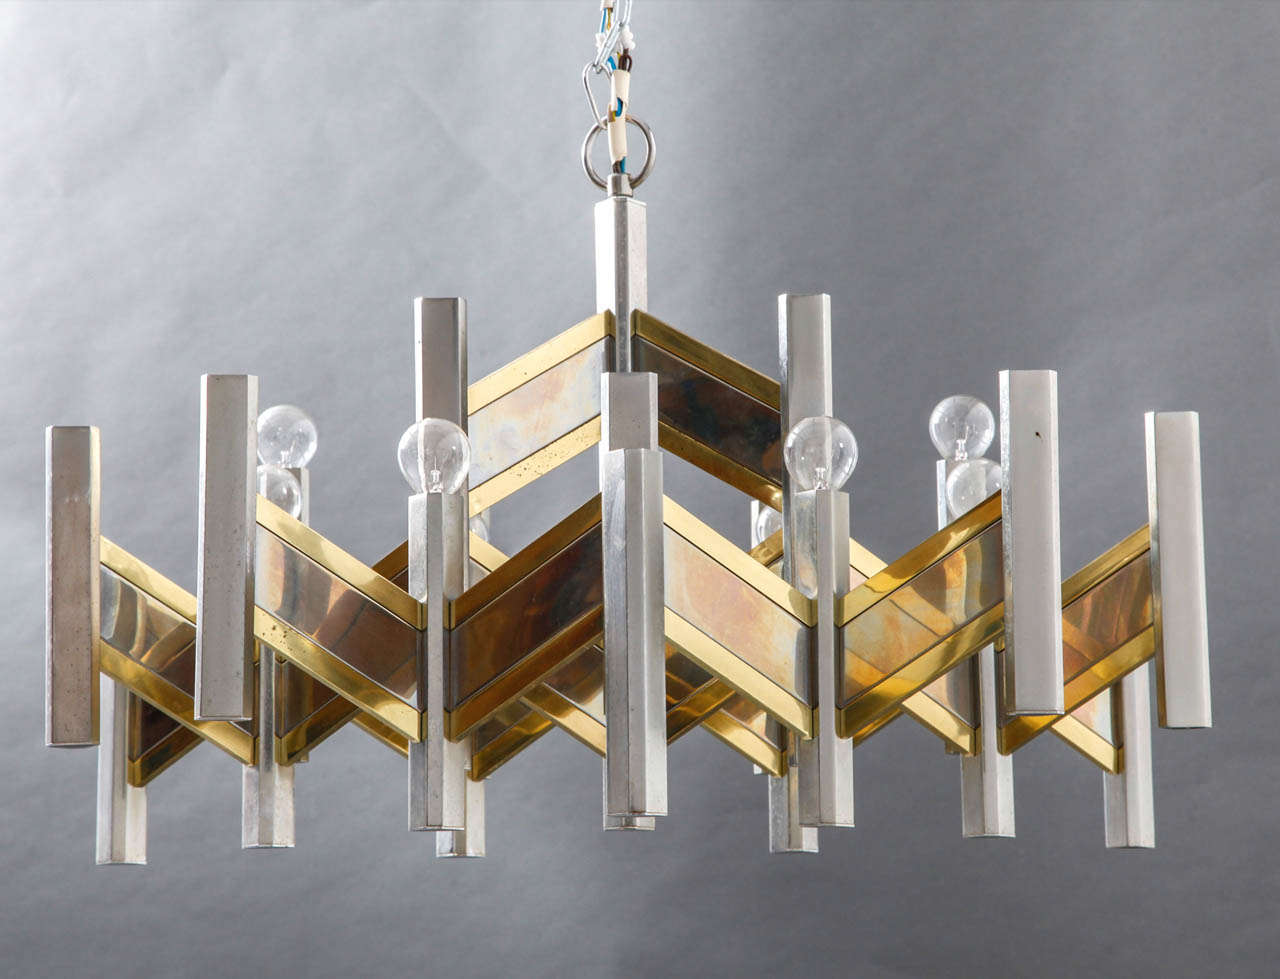 Large scale chrome and brass chandelier by Gaetano Sciolari zig zag design body with 21 lights.
Suspended with chrome chain, labeled Sciolari Italy.